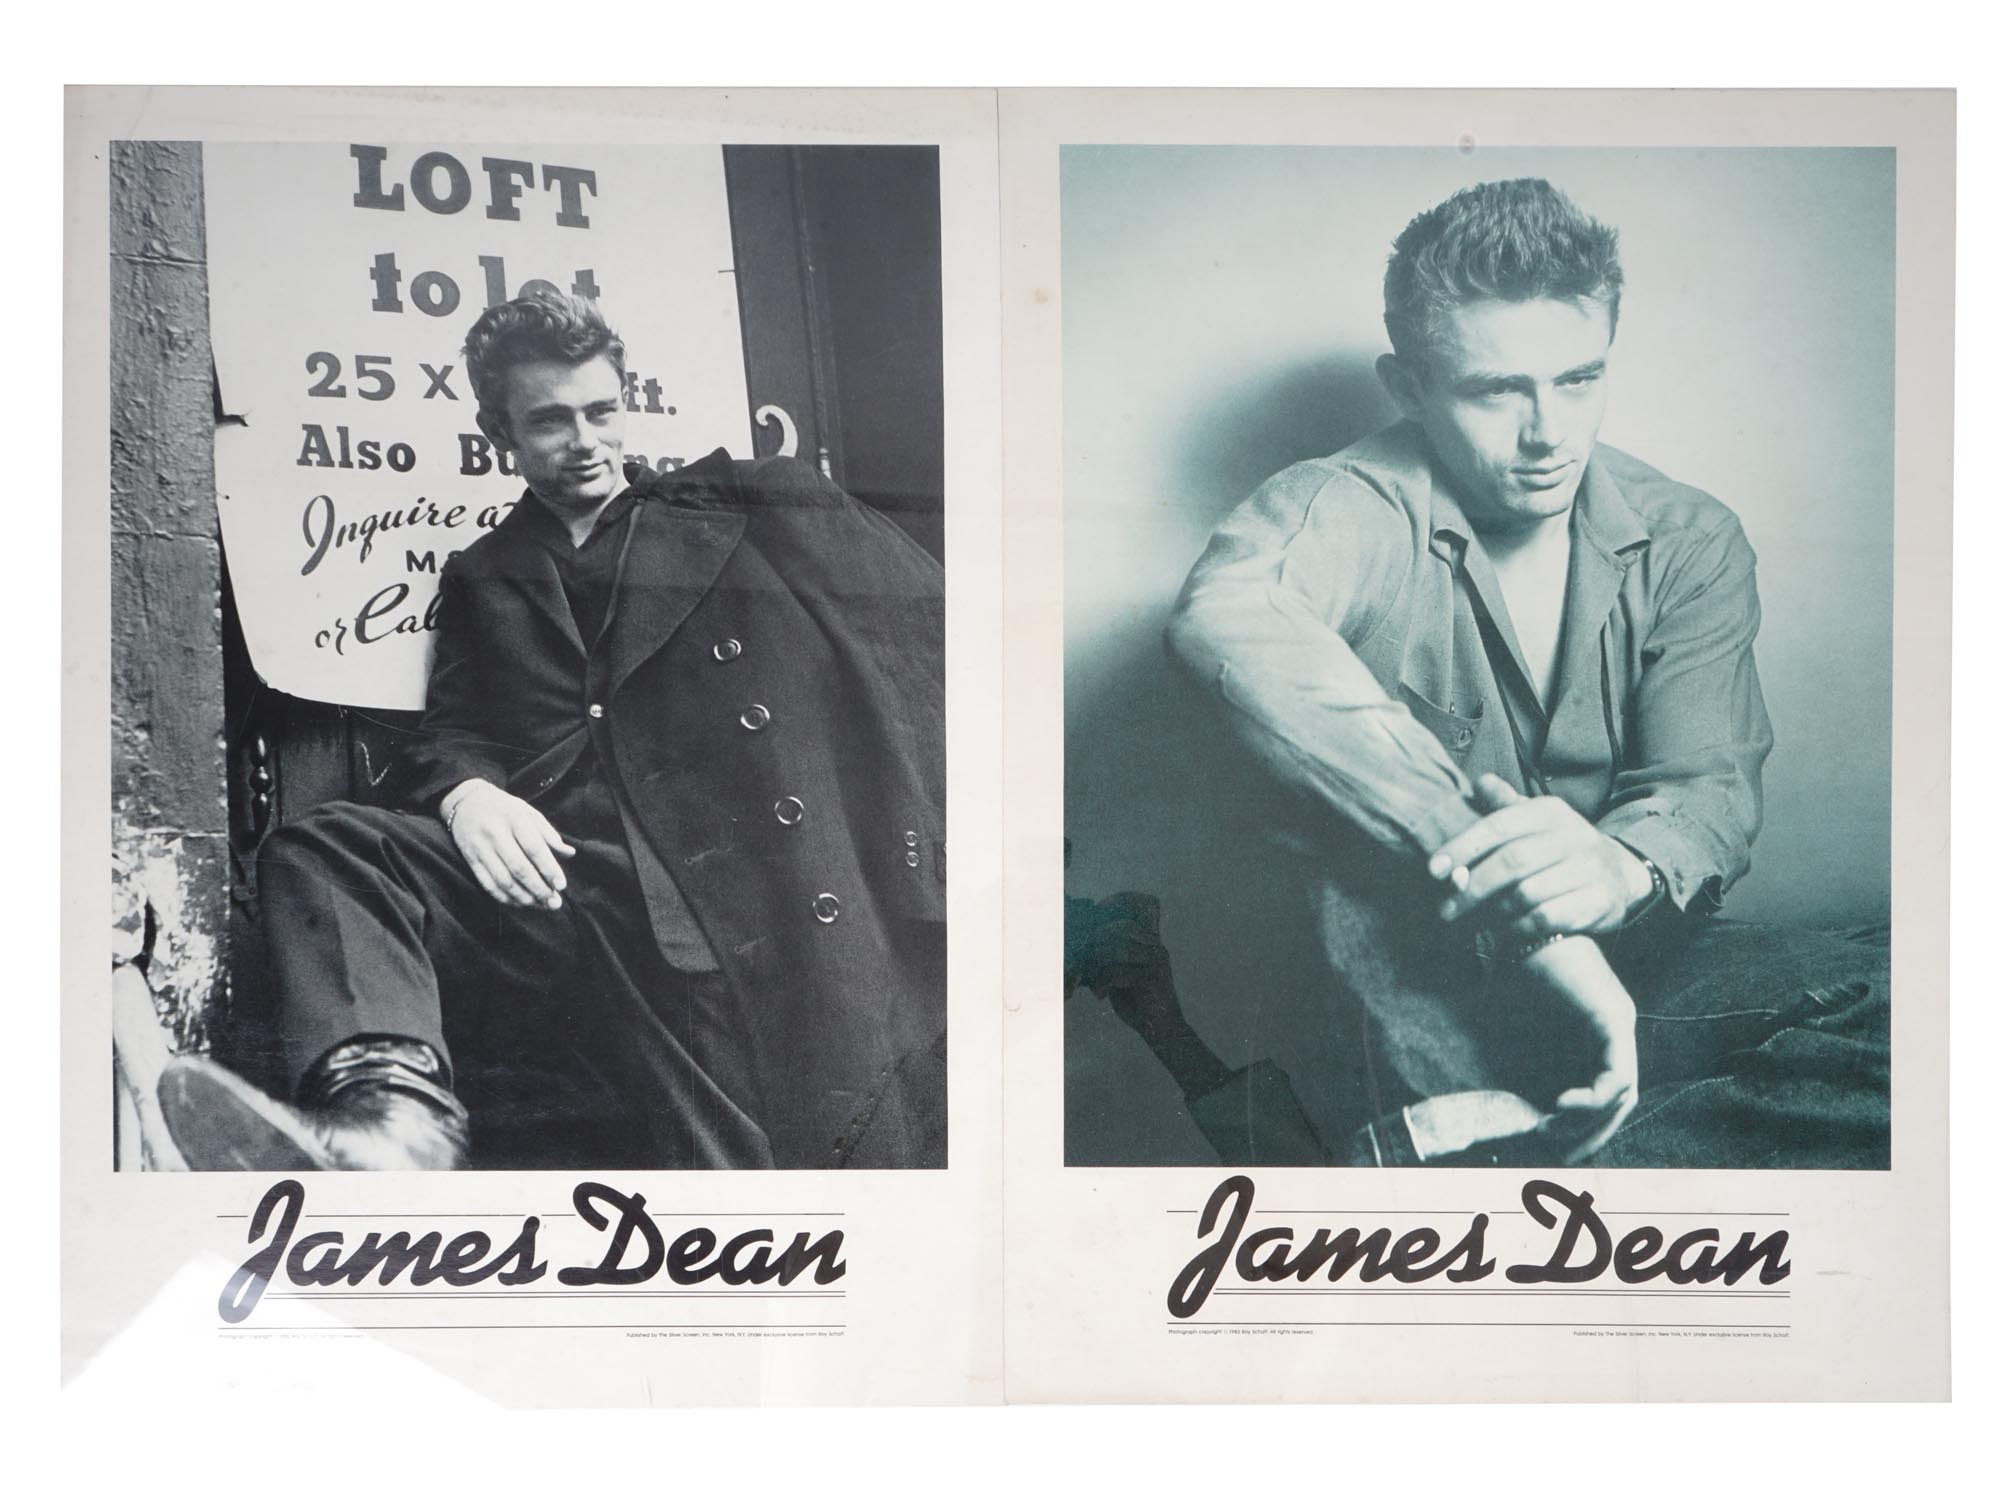 SIX SILVER SCREEN POSTERS THE BEATLES JAMES DEAN PIC-2